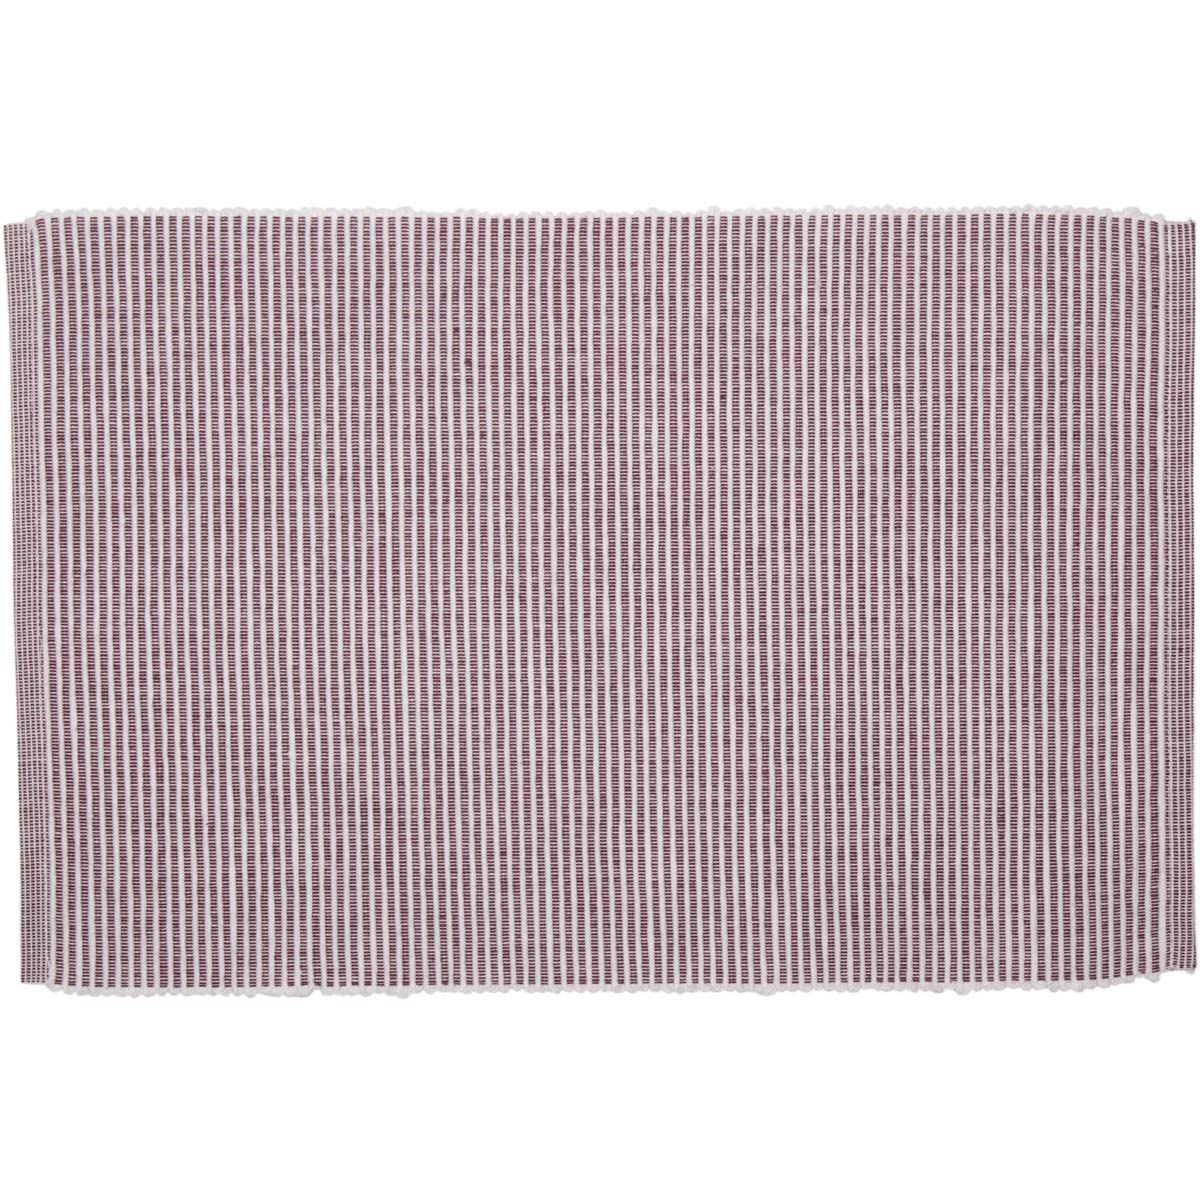 April & Olive Ashton Burgundy Ribbed Placemat Set of 6 12x18 By VHC Brands